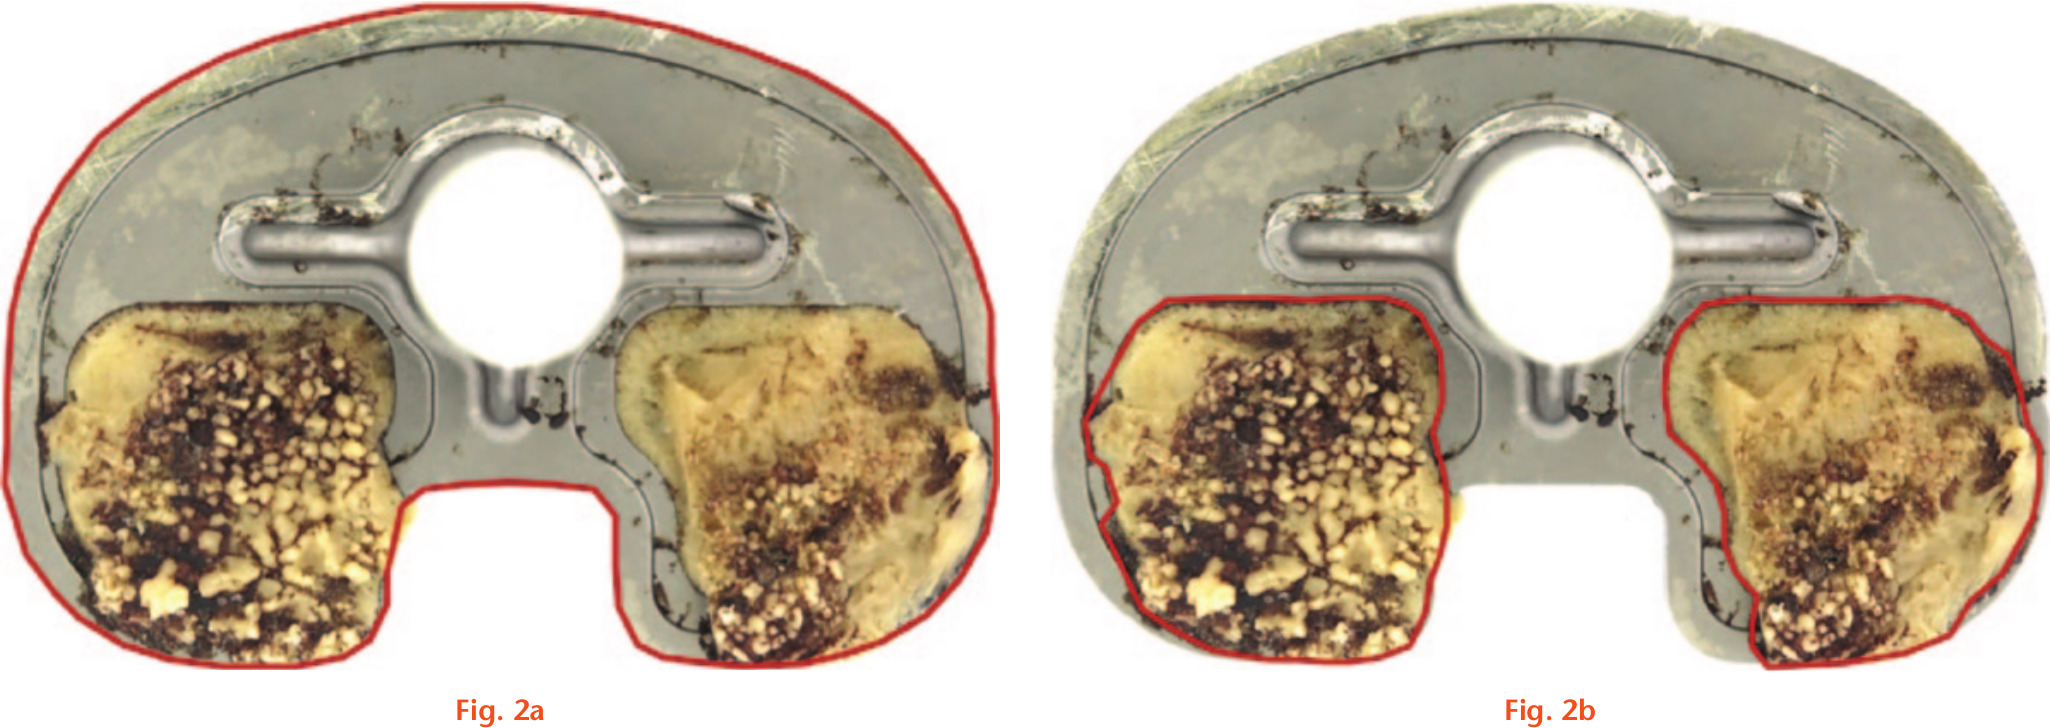 Fig. 2 
            Example of sample analyzed using the photogrammetric method.20,21 a) Total tibial tray backside surface contours highlighted in red. b) Amount of surface covered by cement highlighted in red.
          